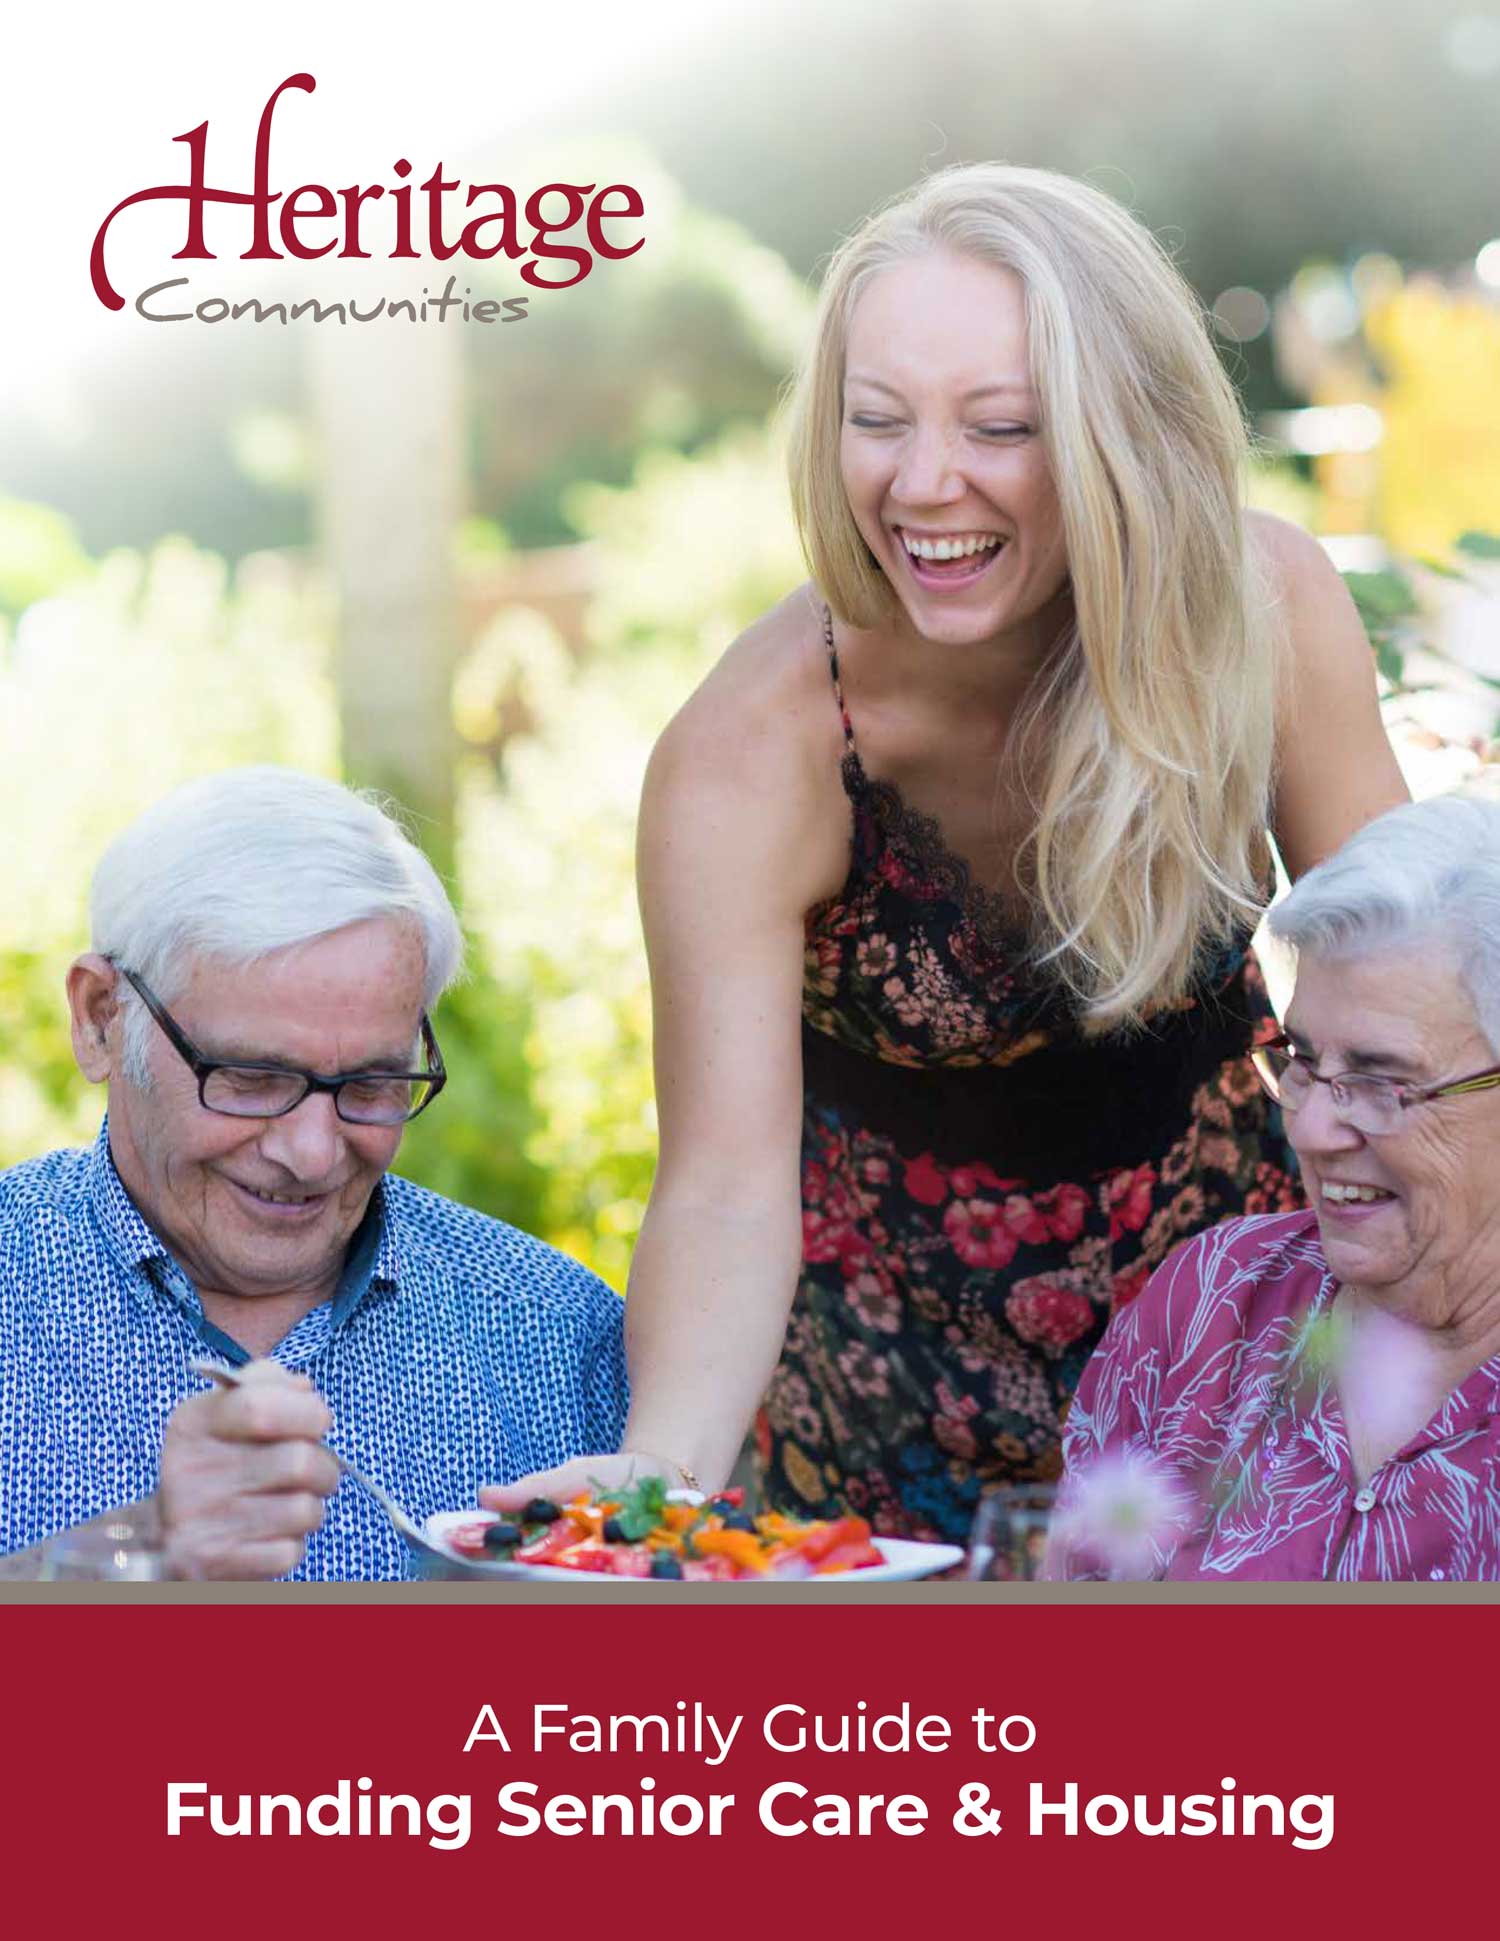 Heritage Funding Senior Care Guide Cover